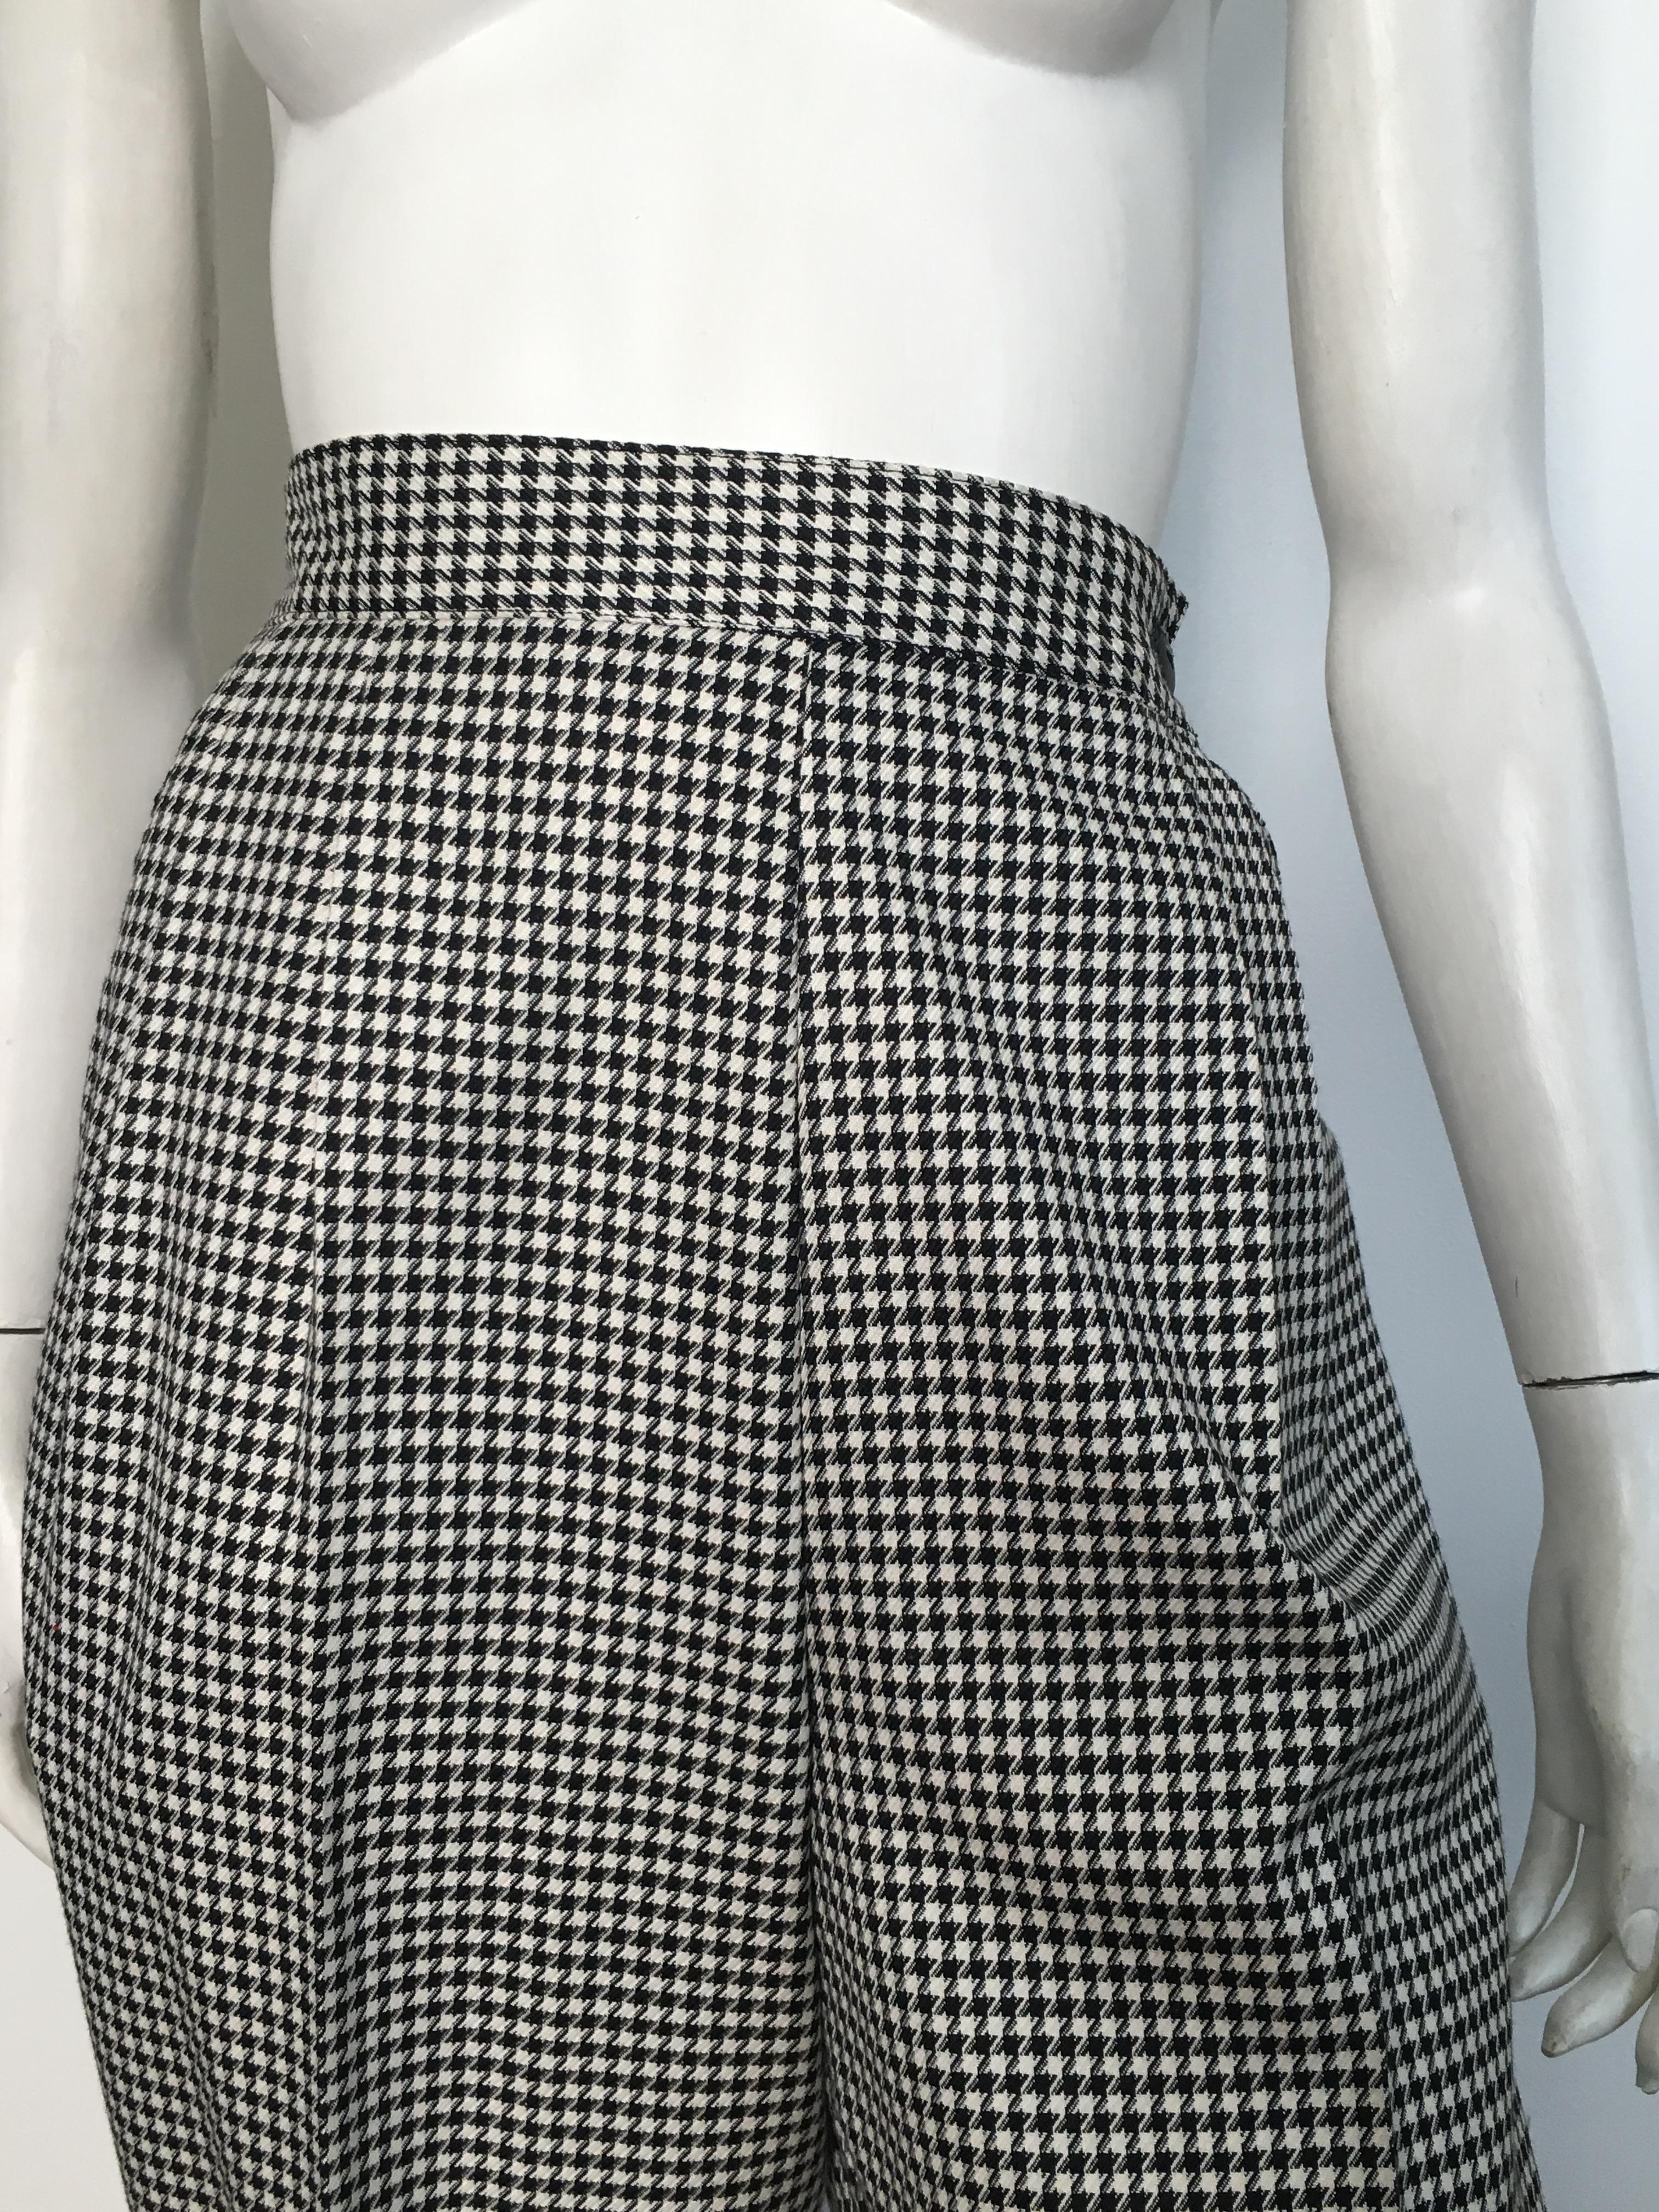 Pierre Cardin 1980s Houndstooth Pleated Pants with Pockets Size 8 / 10.  In Excellent Condition For Sale In Atlanta, GA